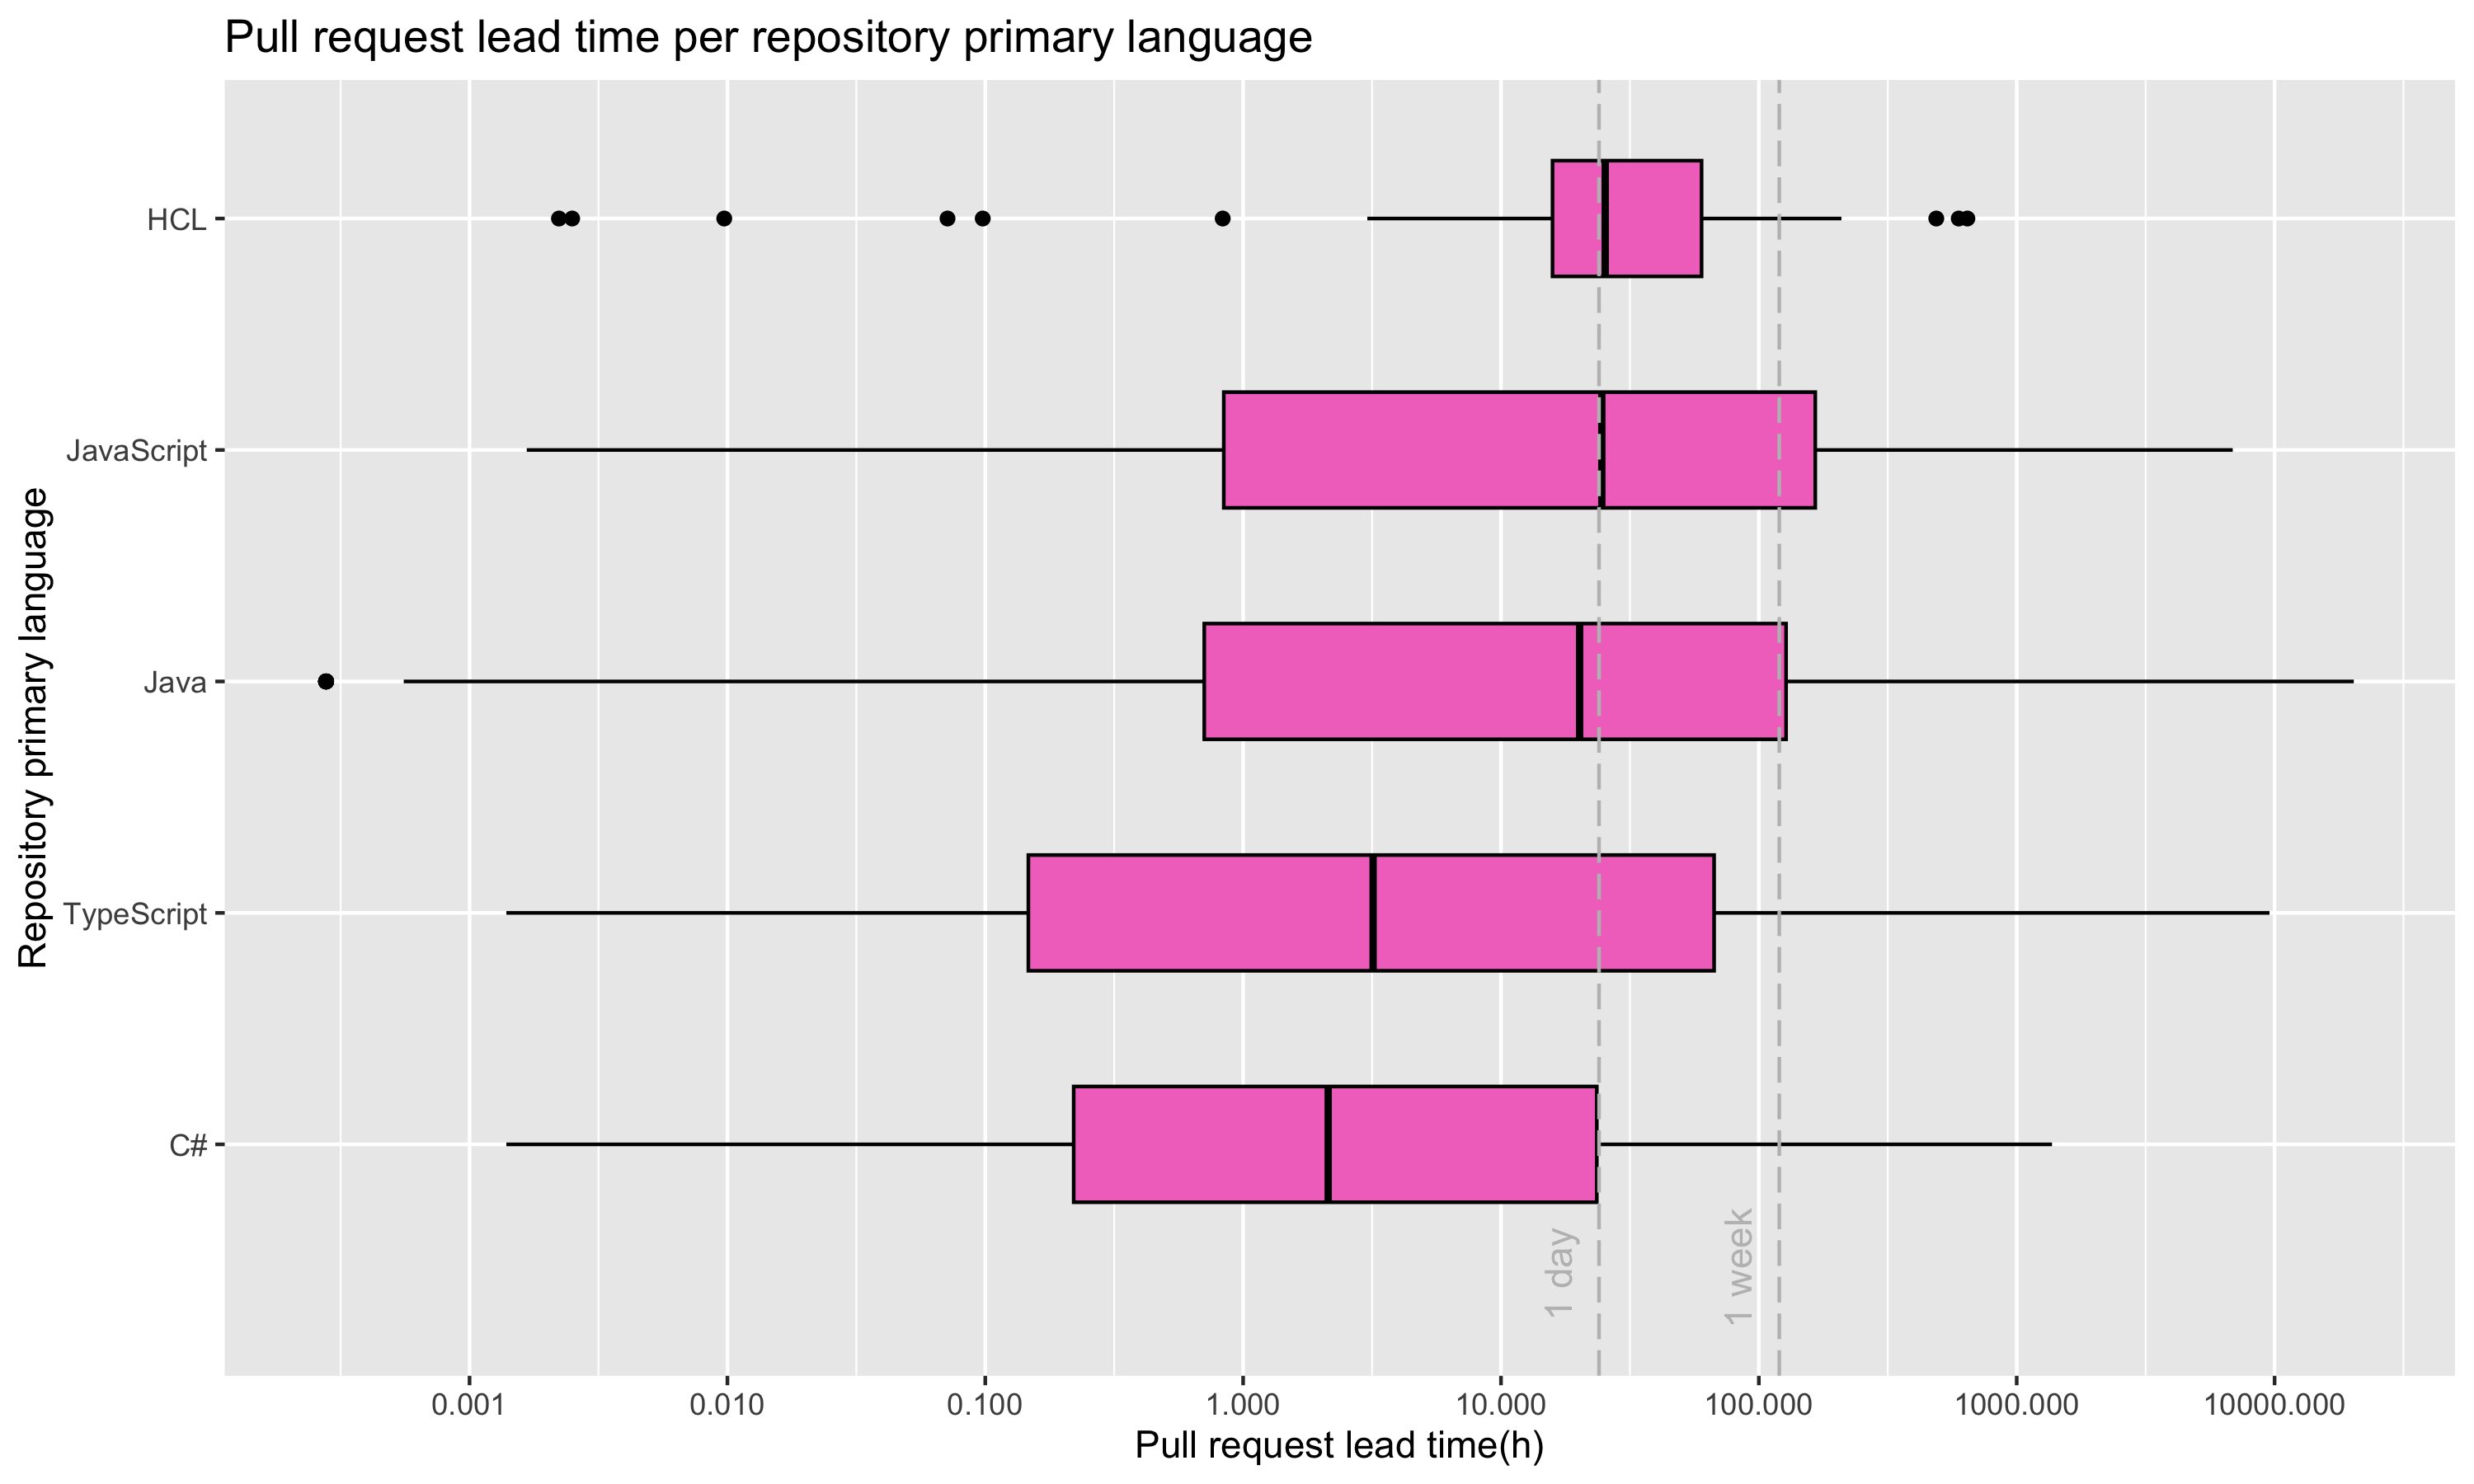 Pull request lead time per repository primary language